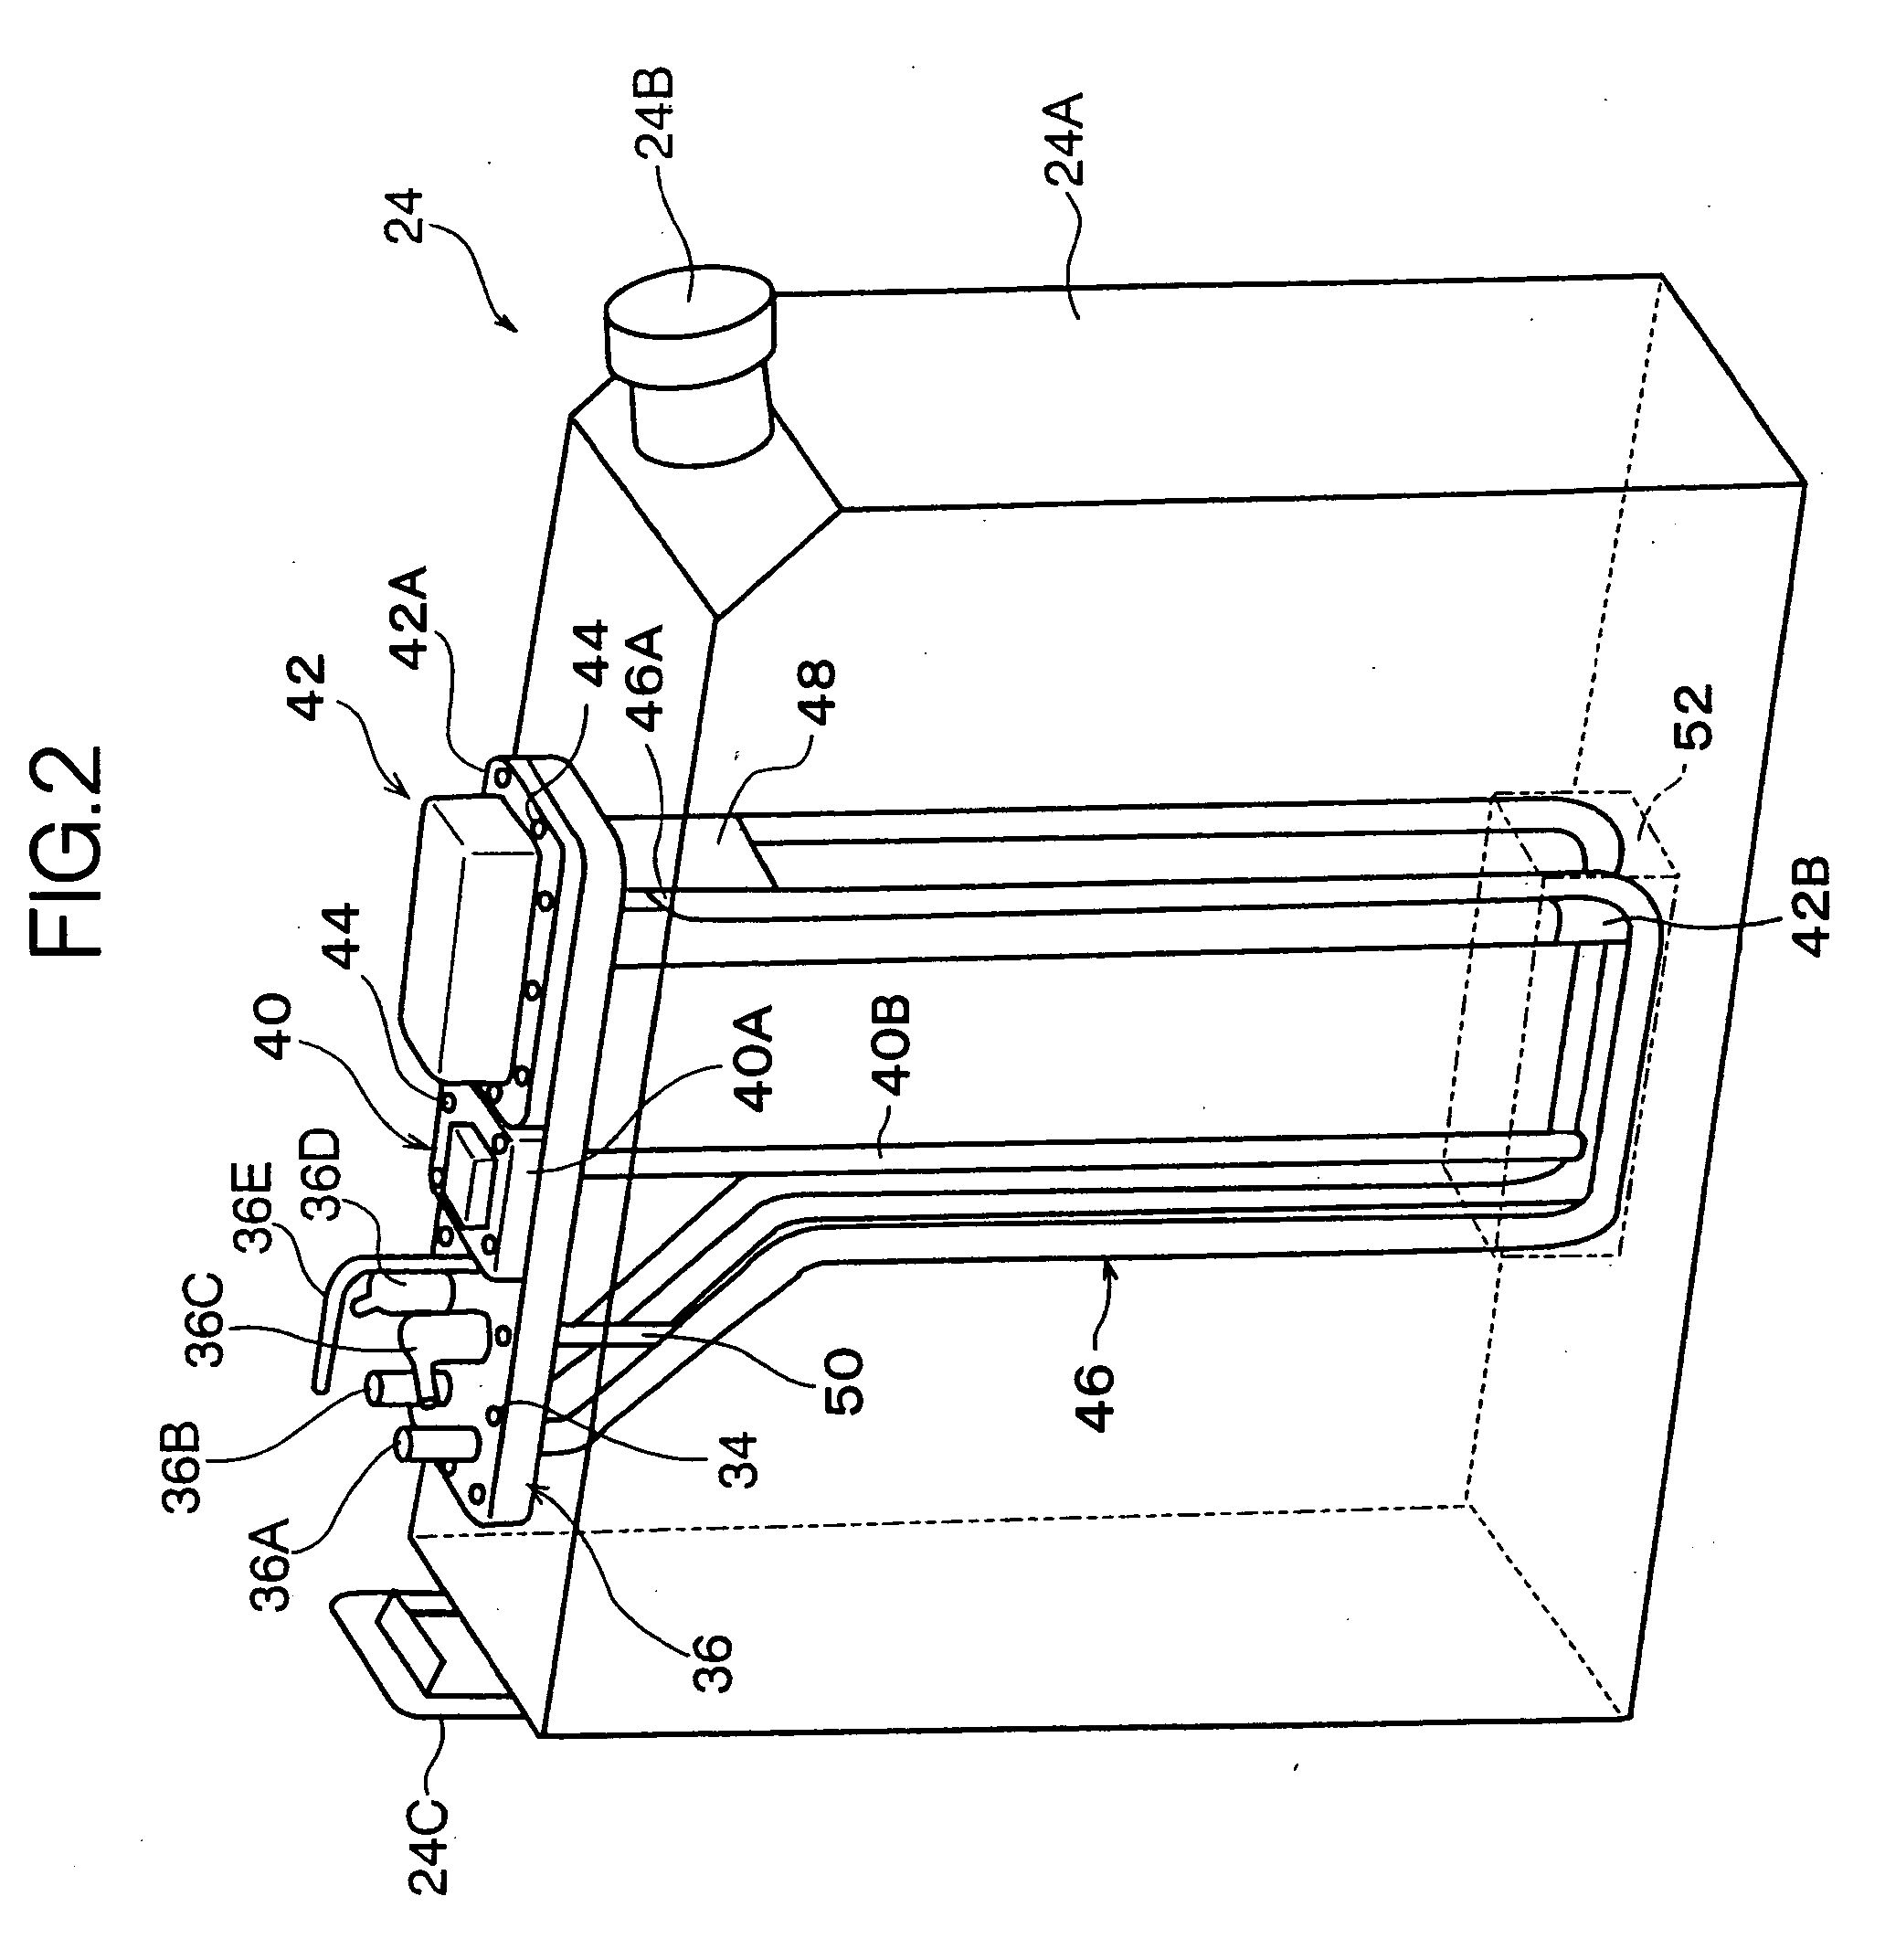 Structure for reducing agent container